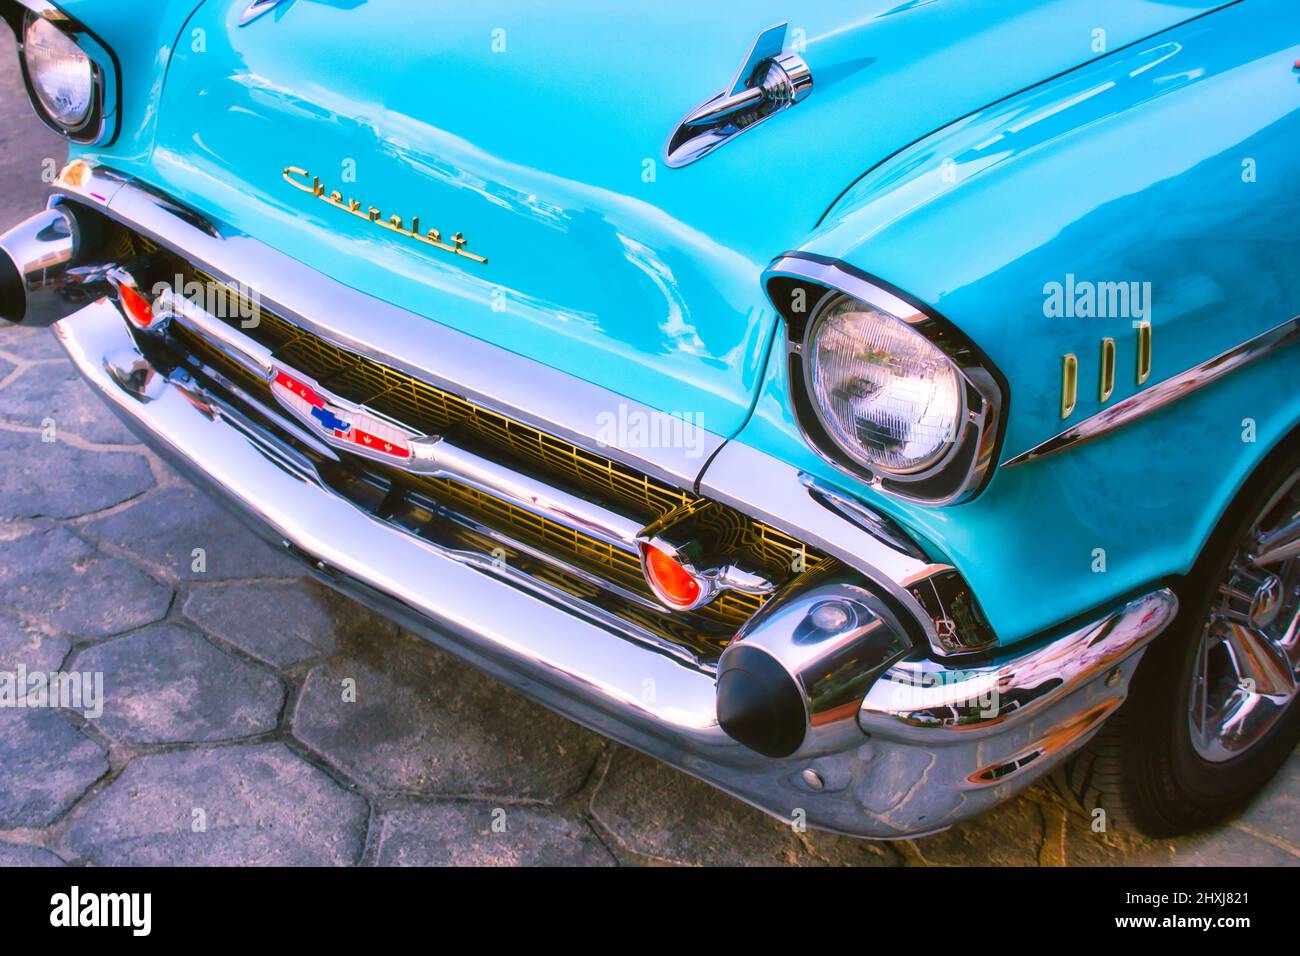 Closeup of the front of an aqua marine blue 1957 Chevrolet 150 with bullet bumper guards Stock Photo